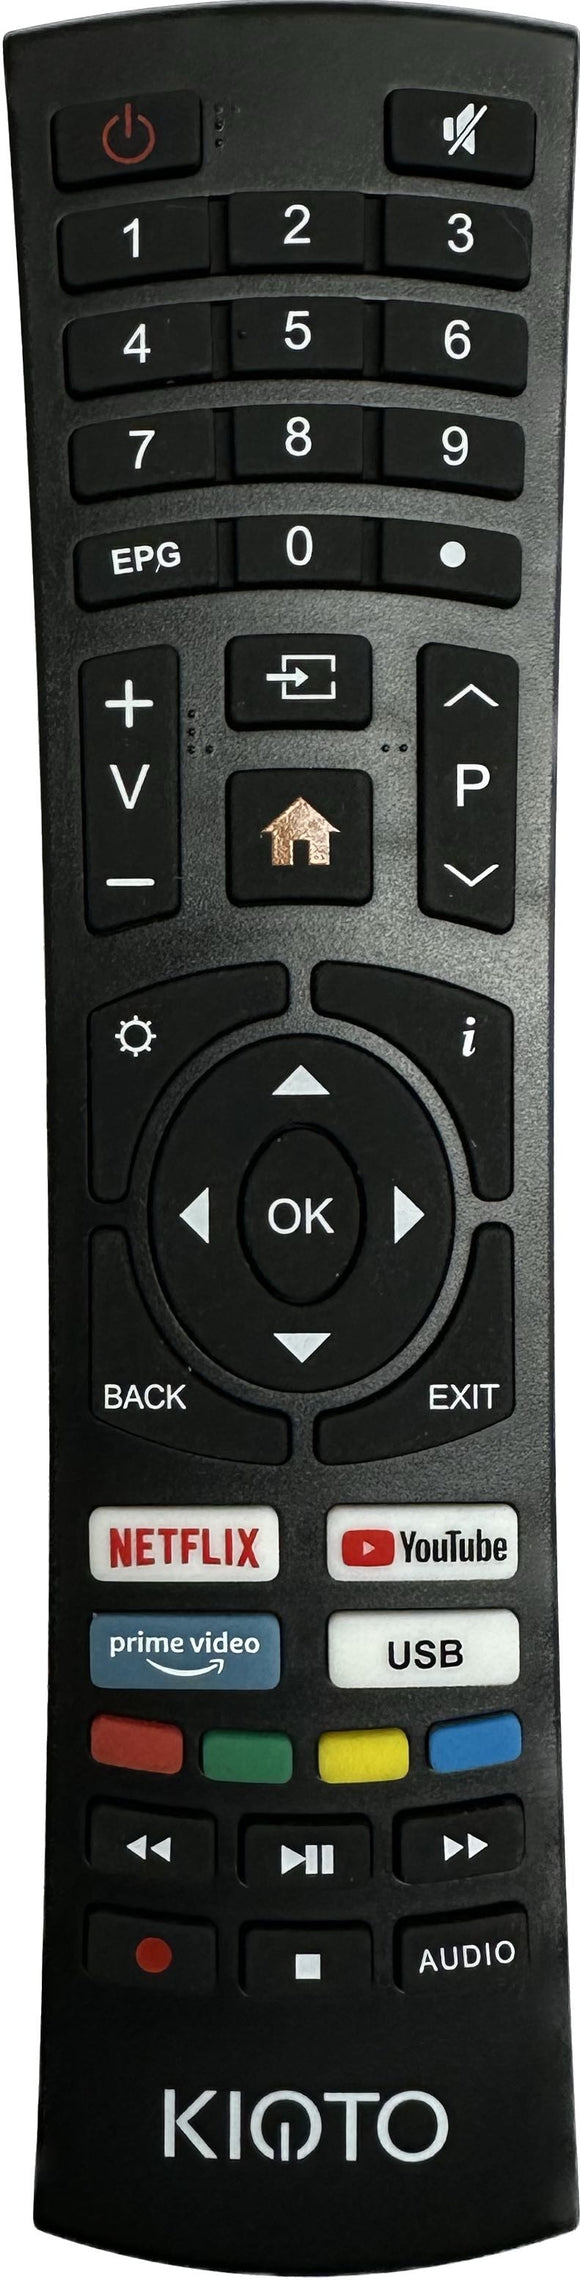 BAUHN ATV65UHDS-1020 LCD TV Replacement Remote Control